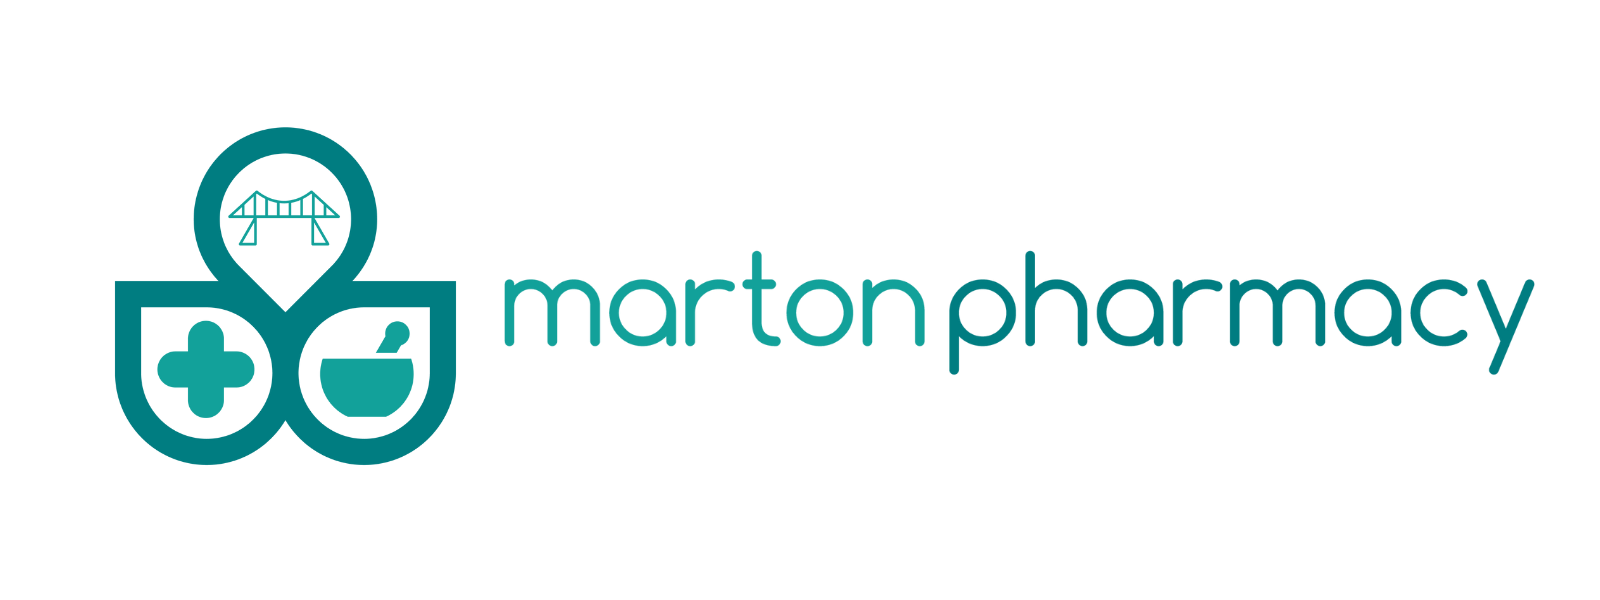 Marton Pharmacy: NHS & Private Services